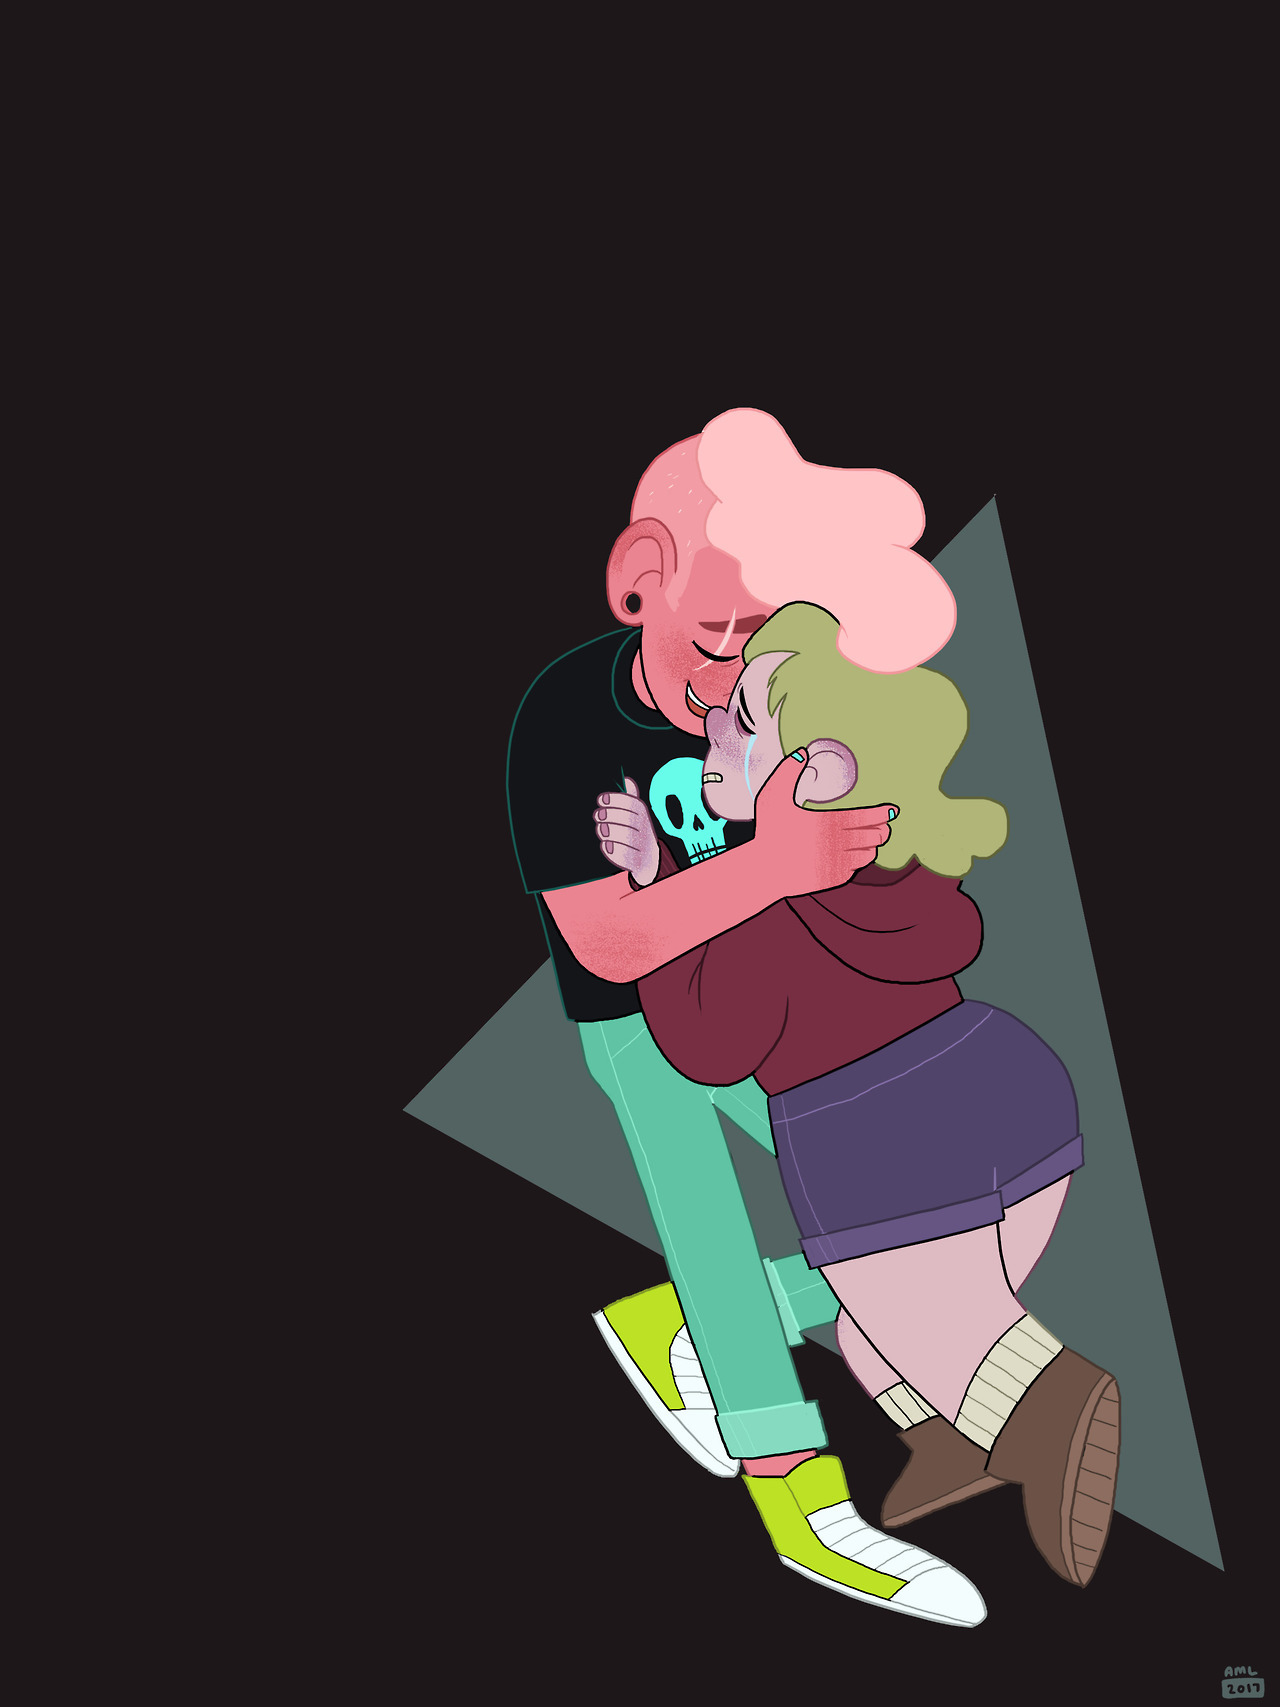 i hope ur having fun in space lars but its time to come apologize to sadie ok